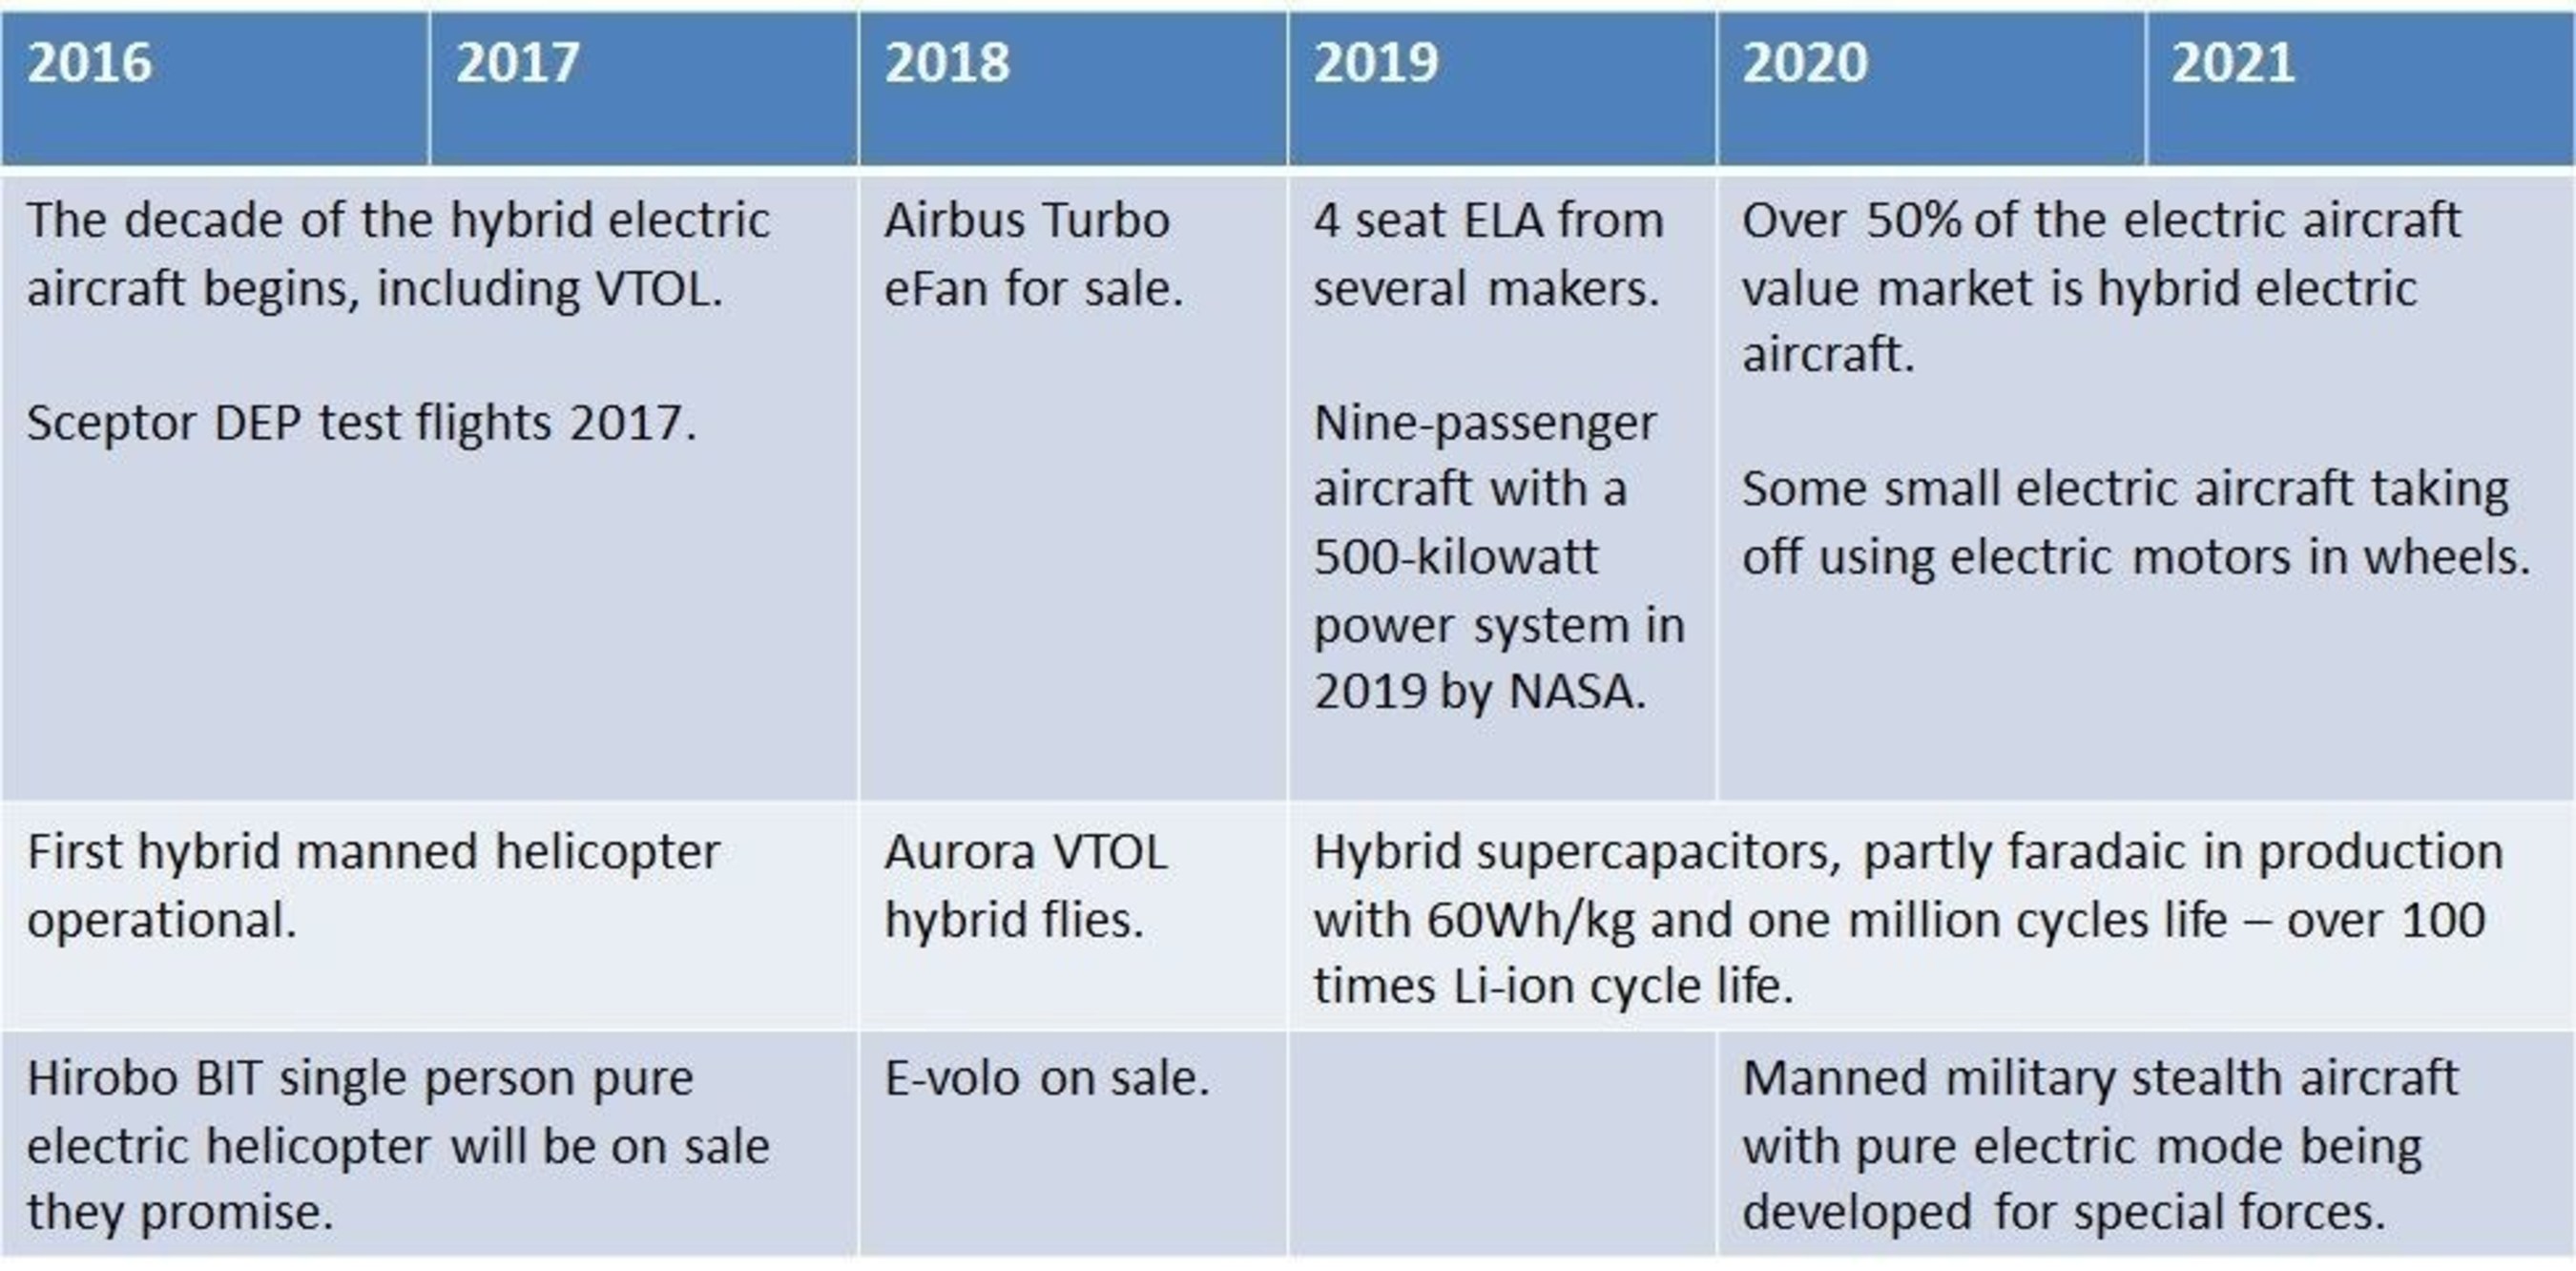 Timeline of manned electric aircraft technology 2016-2021. Source: IDTechEx Research (PRNewsFoto/IDTechEx)